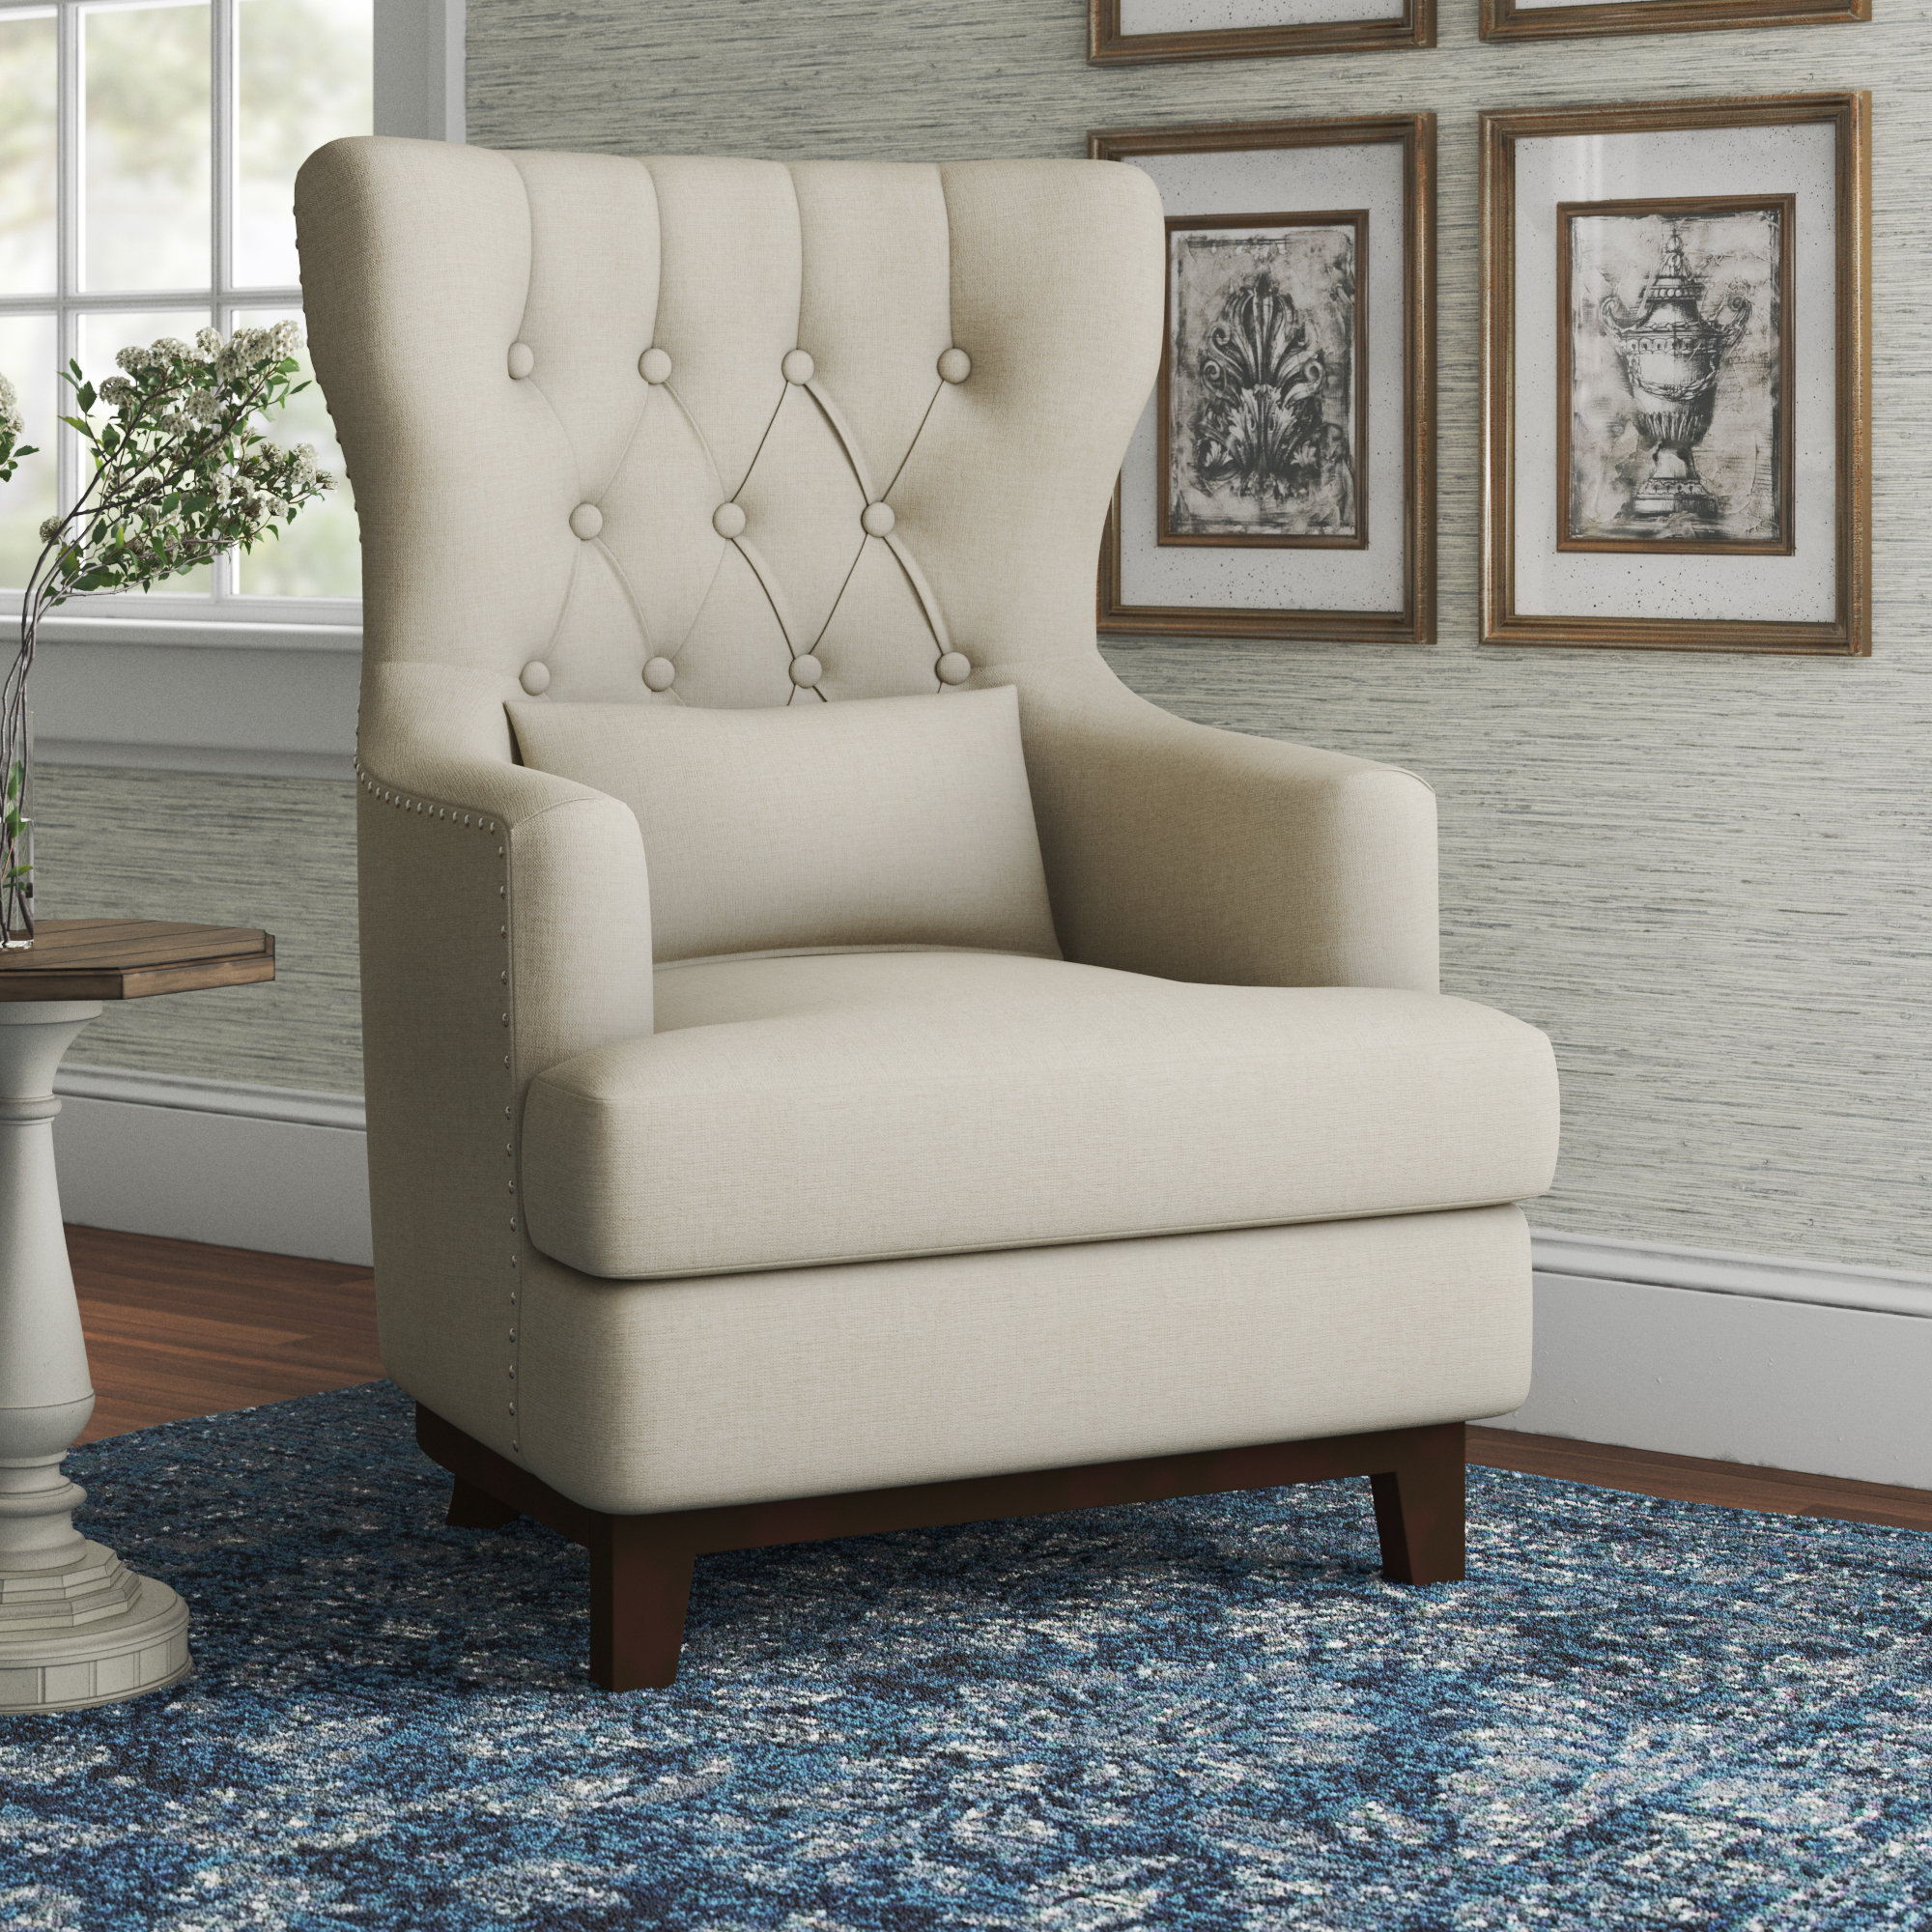 Ataie Textured Upholstery Tufted Back Wingback Chair